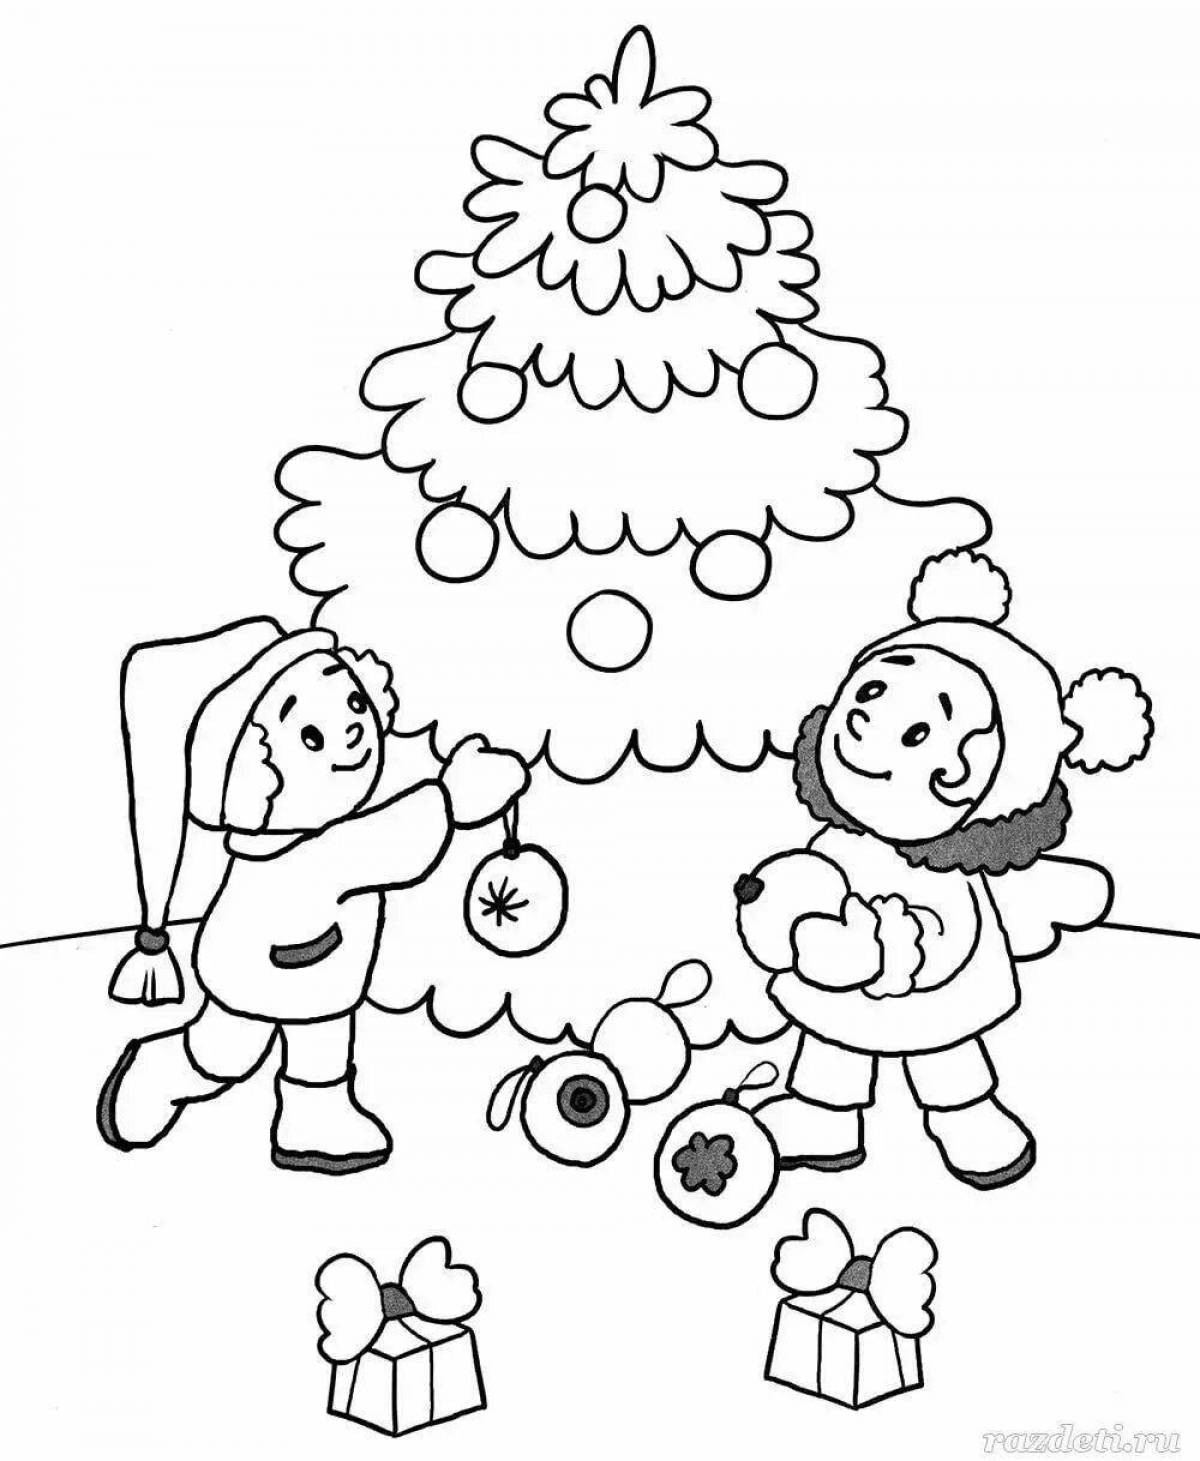 Amazing coloring book for children 2-3 years old for kindergarten in winter